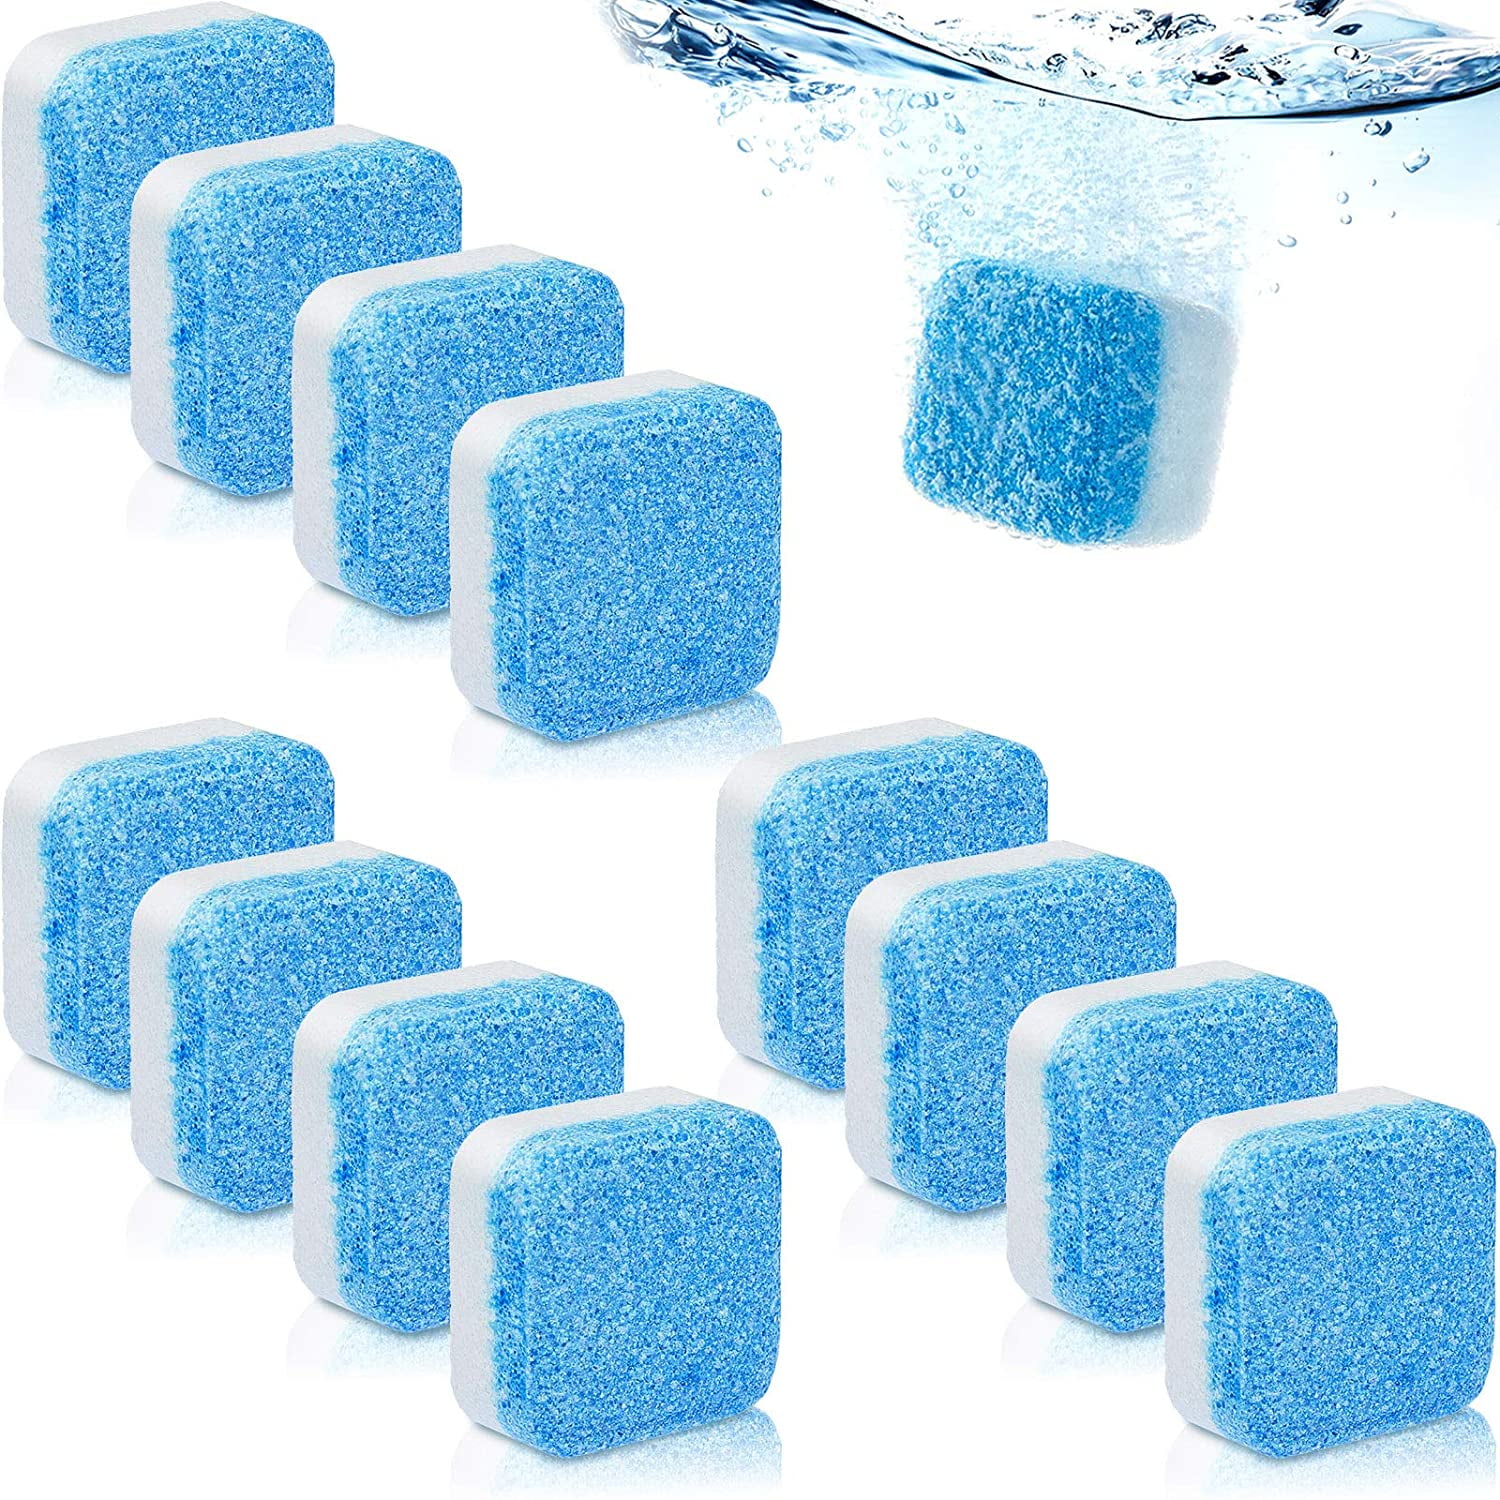 10/20 Washing Machine Cleaner Tablets Deep Solid Washer Cleaning Effervescent 